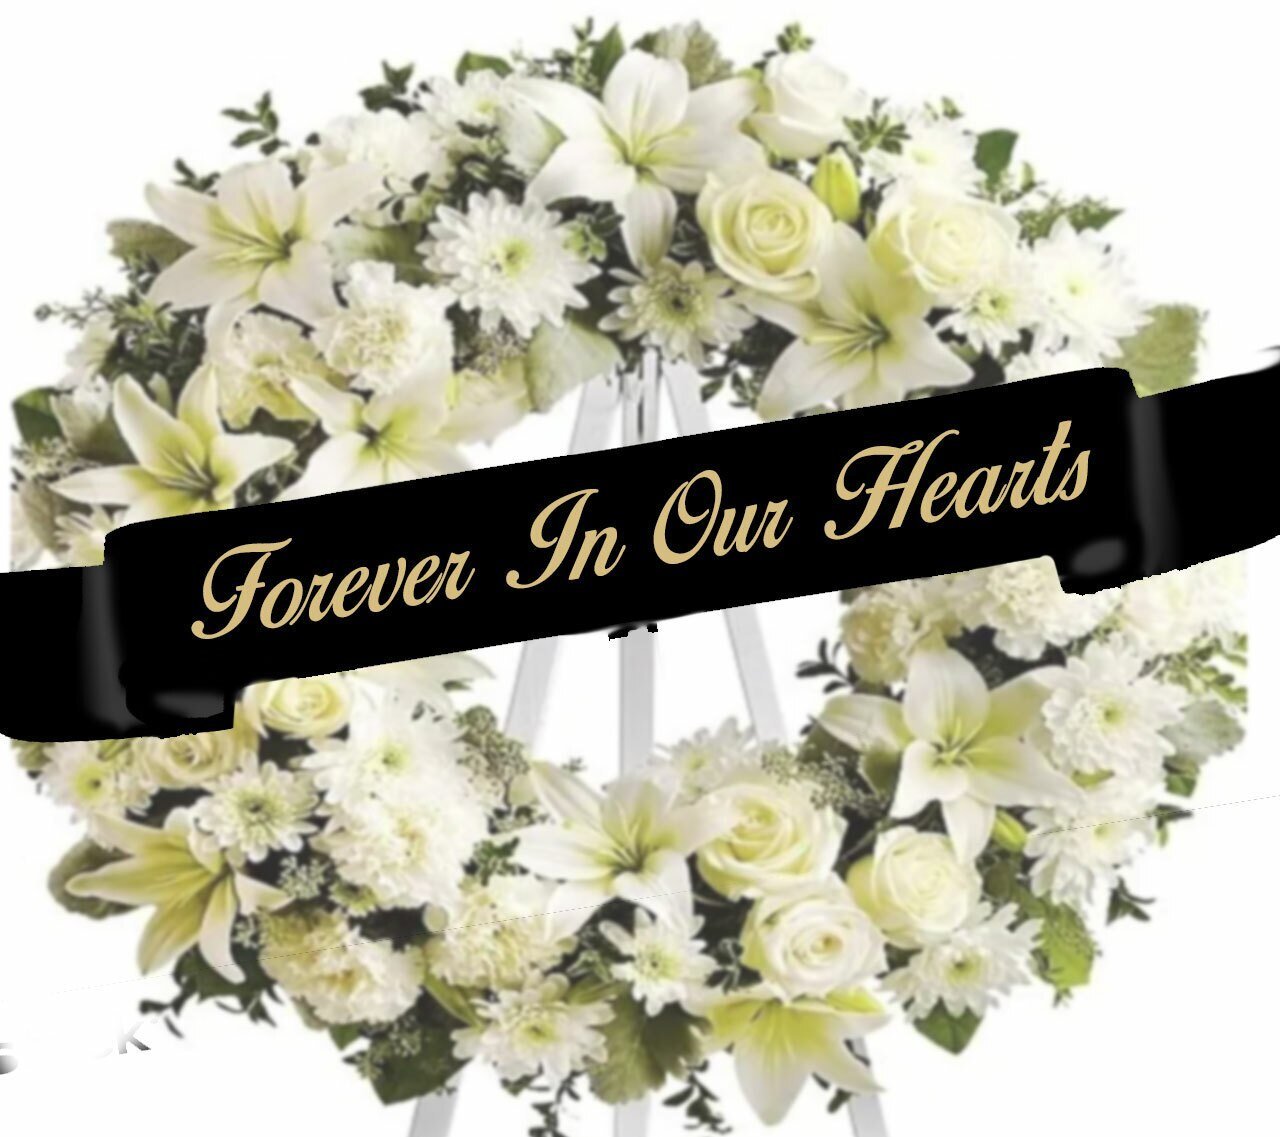 Forever In Our Hearts Funeral Ribbon Banner For Flowers - Celebrate Prints